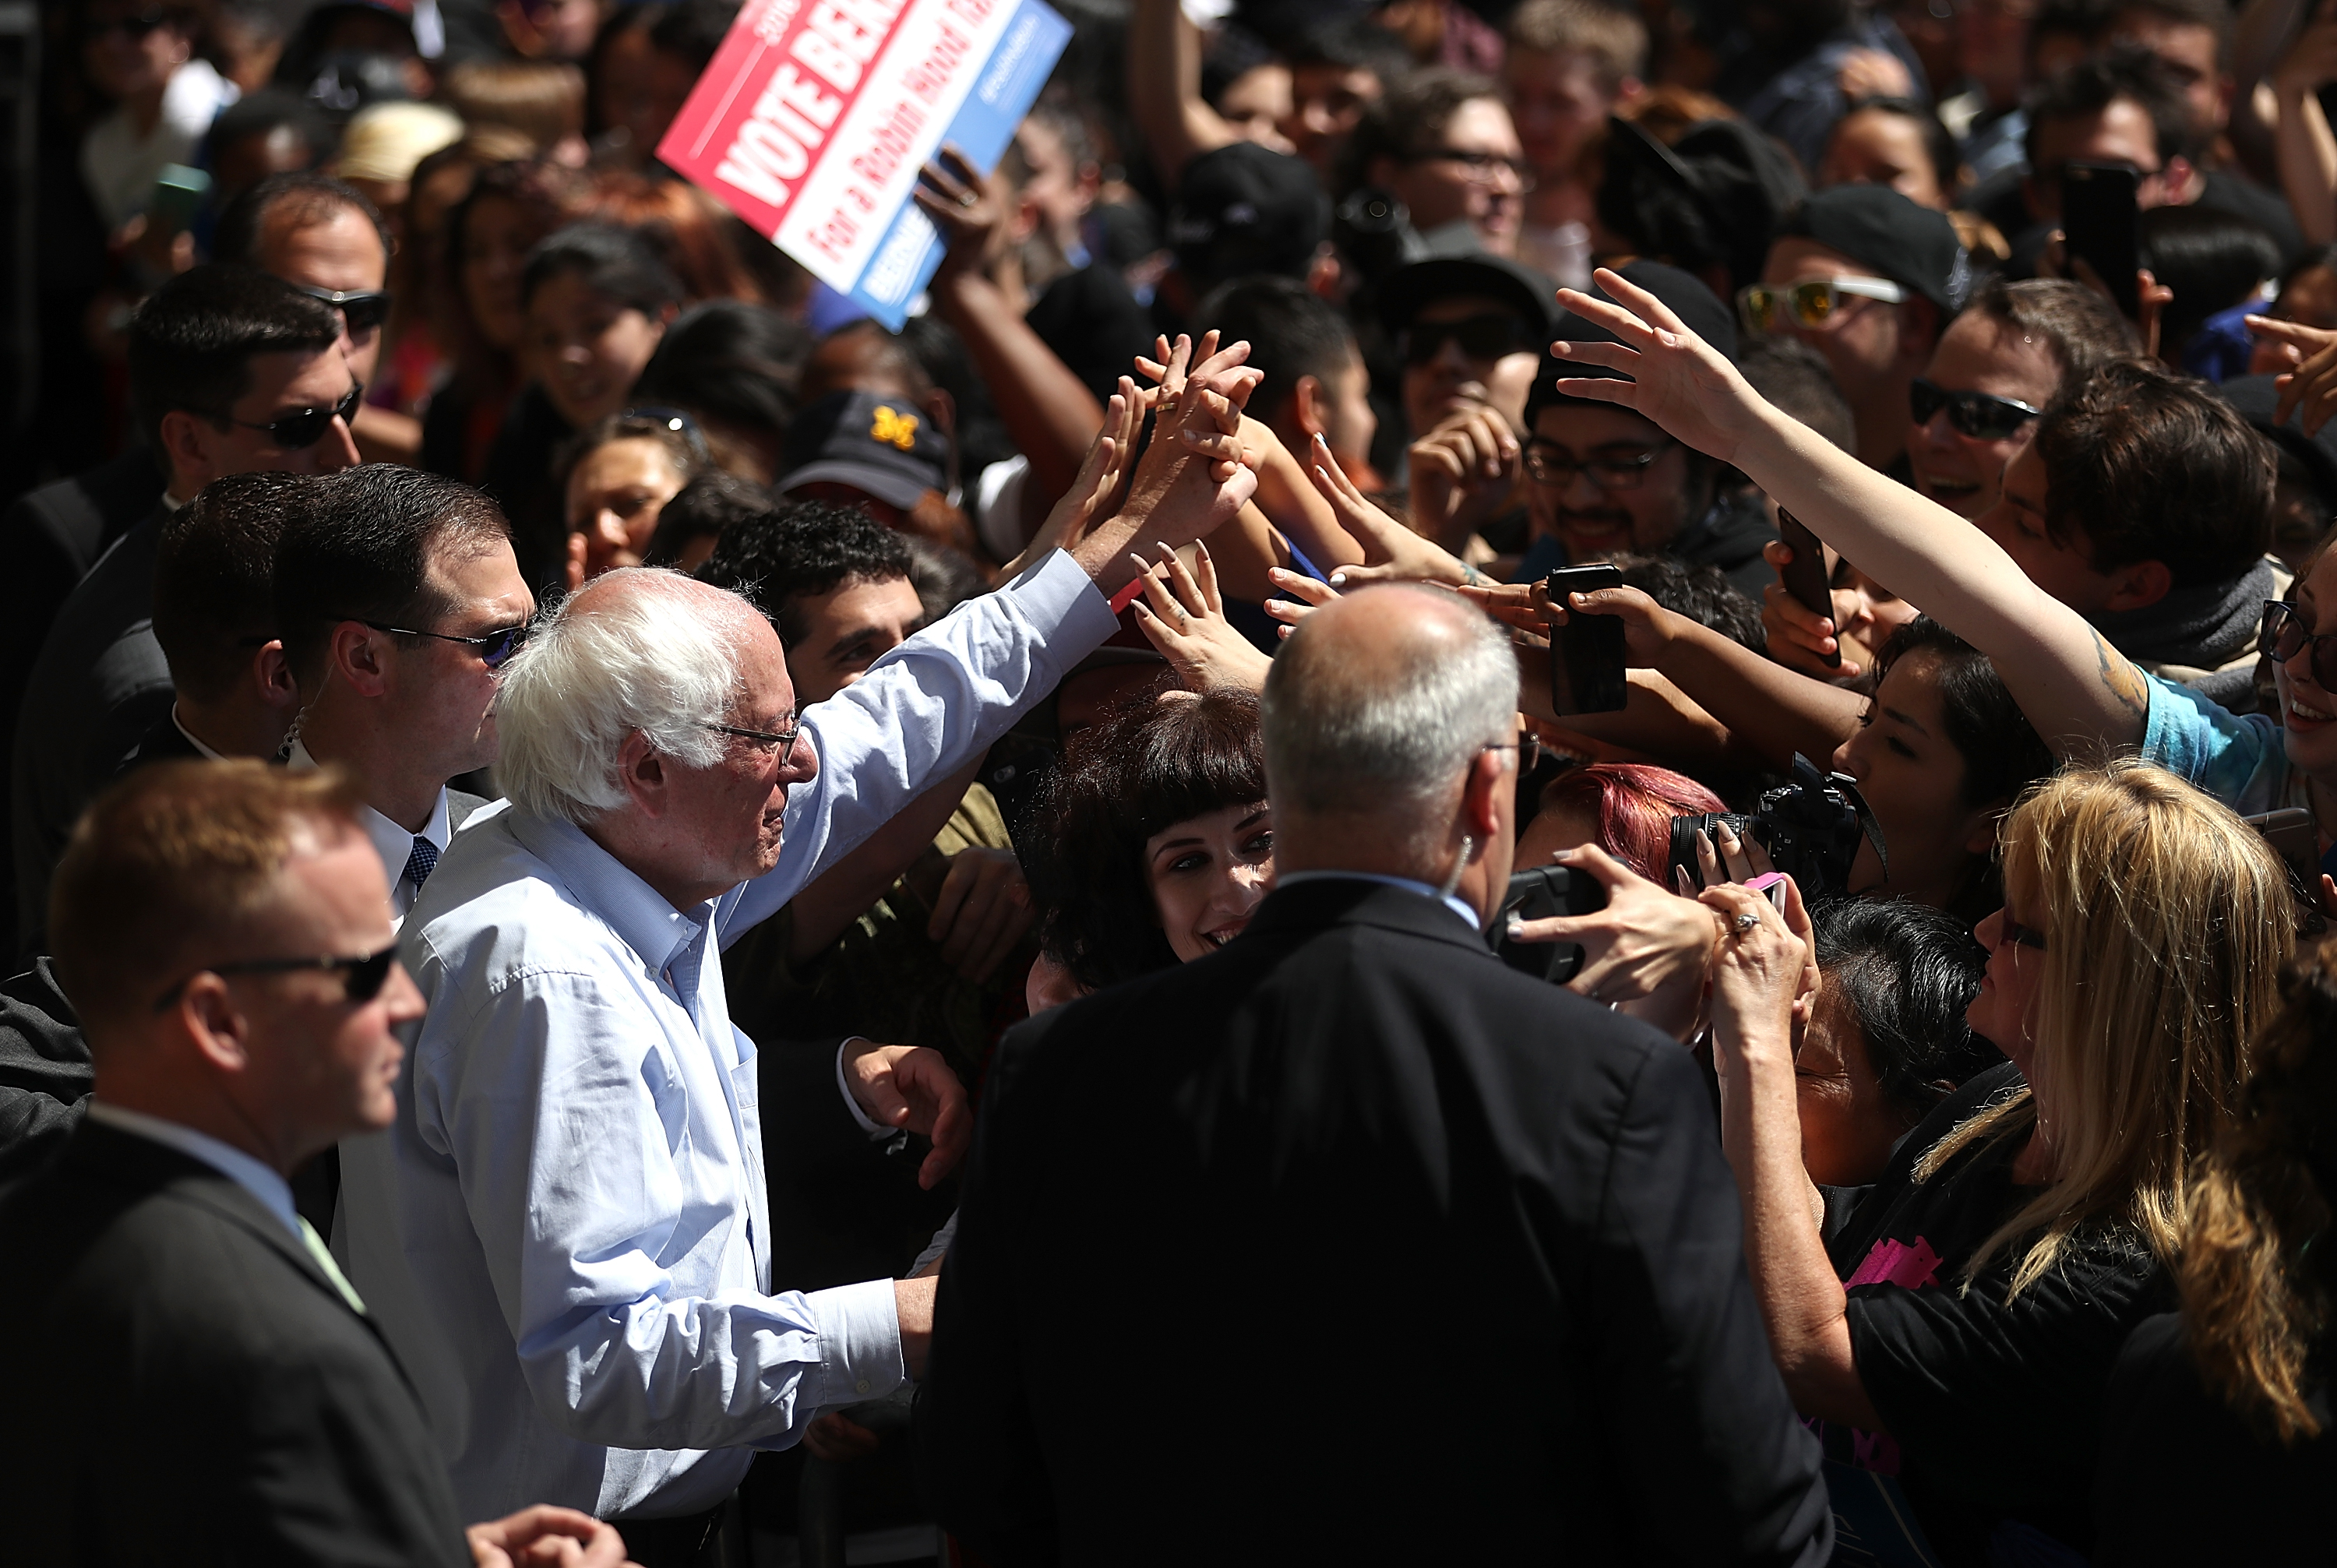 Democratic presidential candidate Sen.Bernie Sanders (D-VT) greets supporters at a campaign rally on May 10, 2016 in Stockton, California. Sanders is campaigning in California ahead of the state's June 7th presidential primary. 